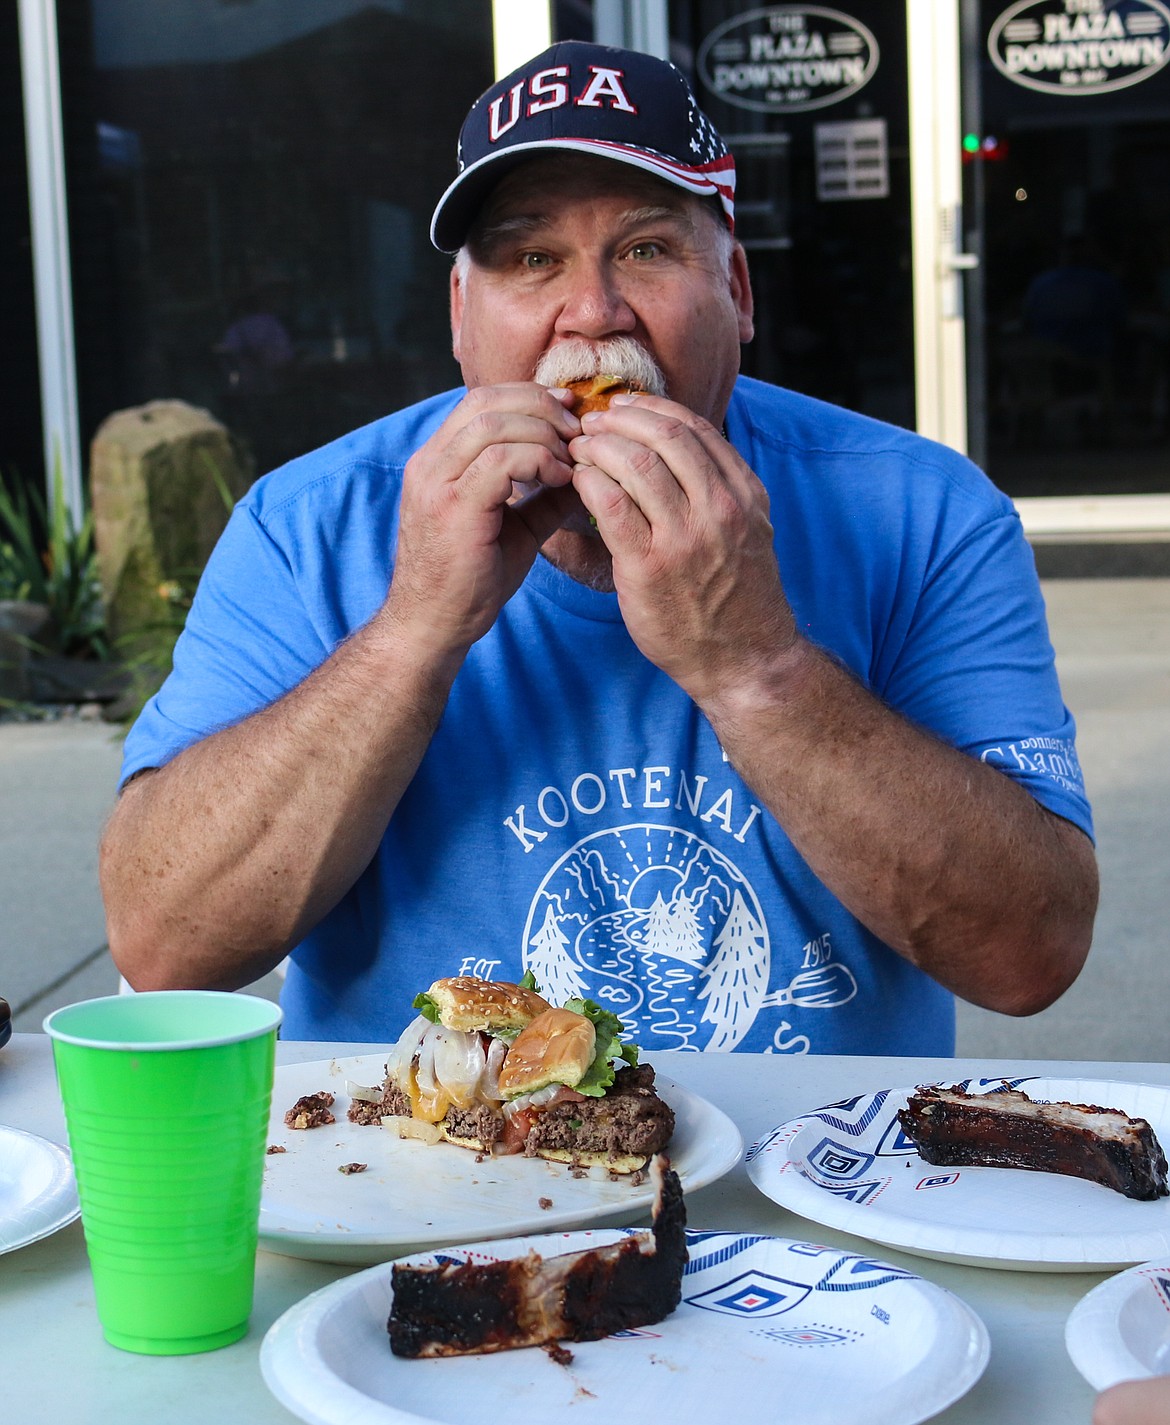 Photo by MANDI BATEMAN
Judge Dave Koon enjoyed his job tasting the competitors&#146; entries during the second annual Wild Game and Pork Rib Cook Off that took place during Kootenai River Days.